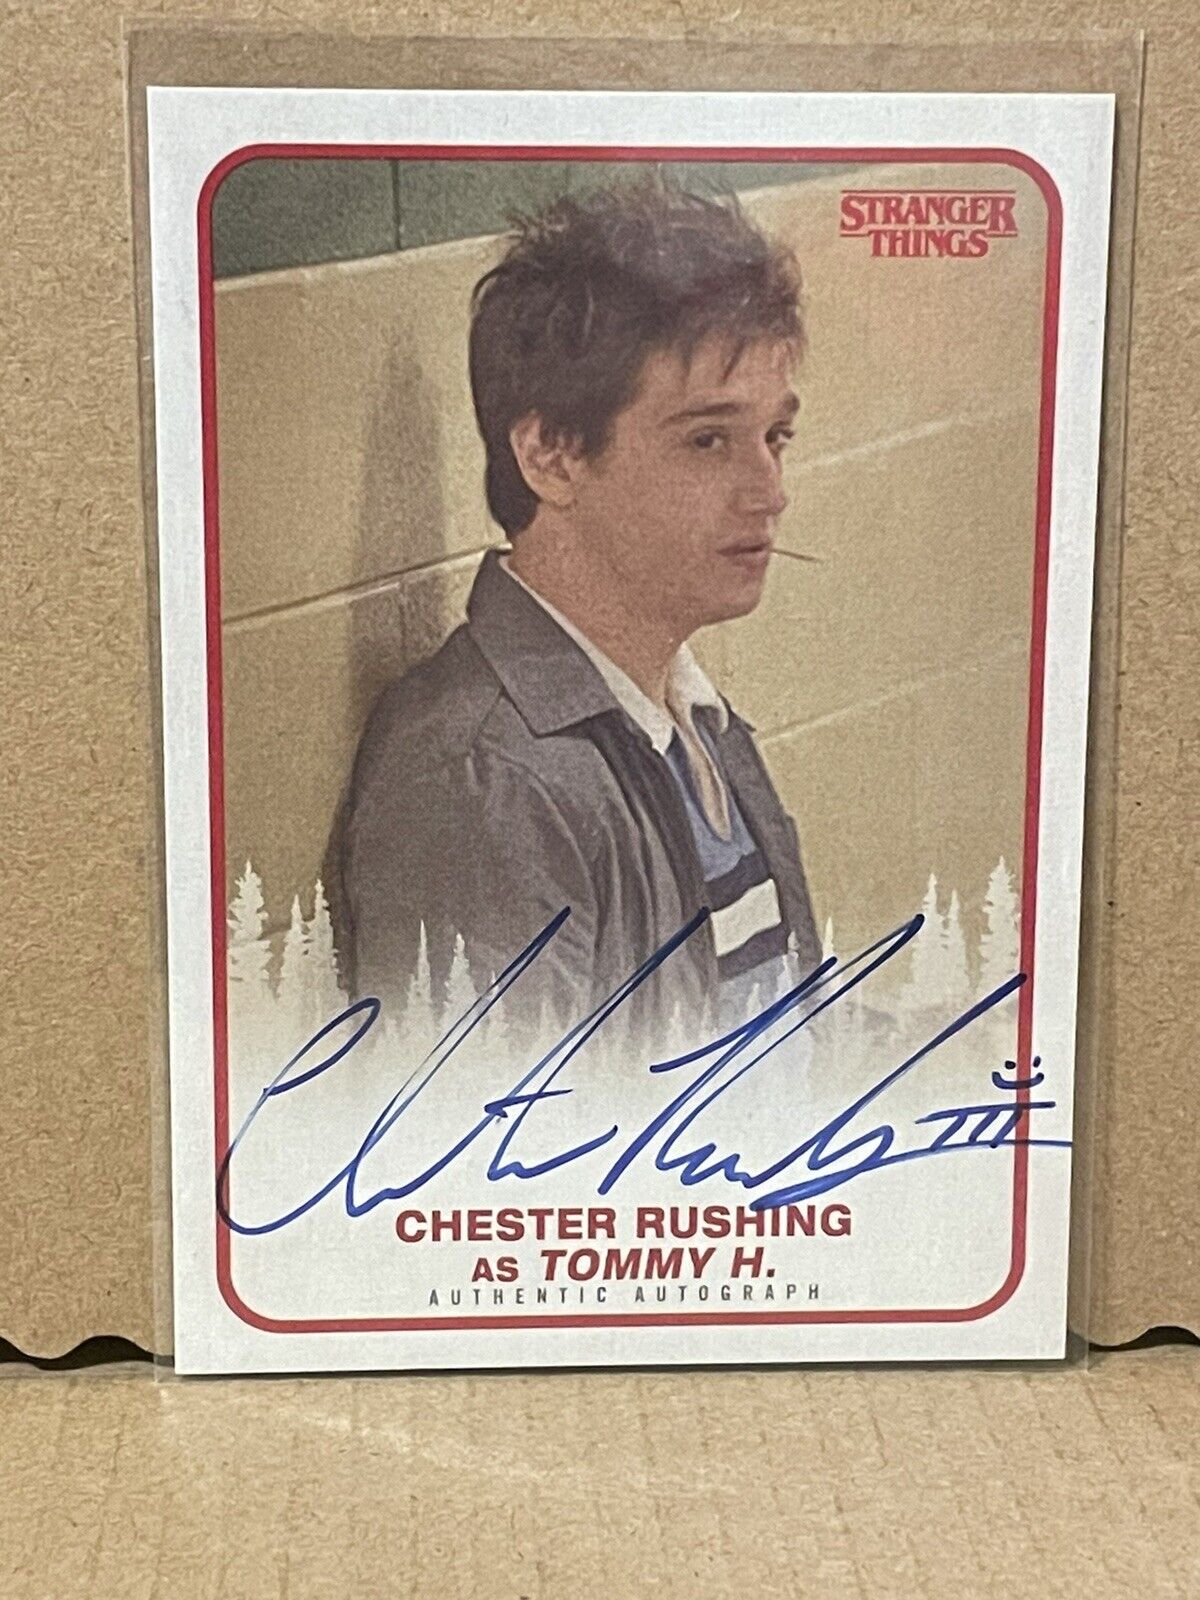 2018 Topps Stranger Things Auto Chester as Rushing Tommy H #A-TH Auto 